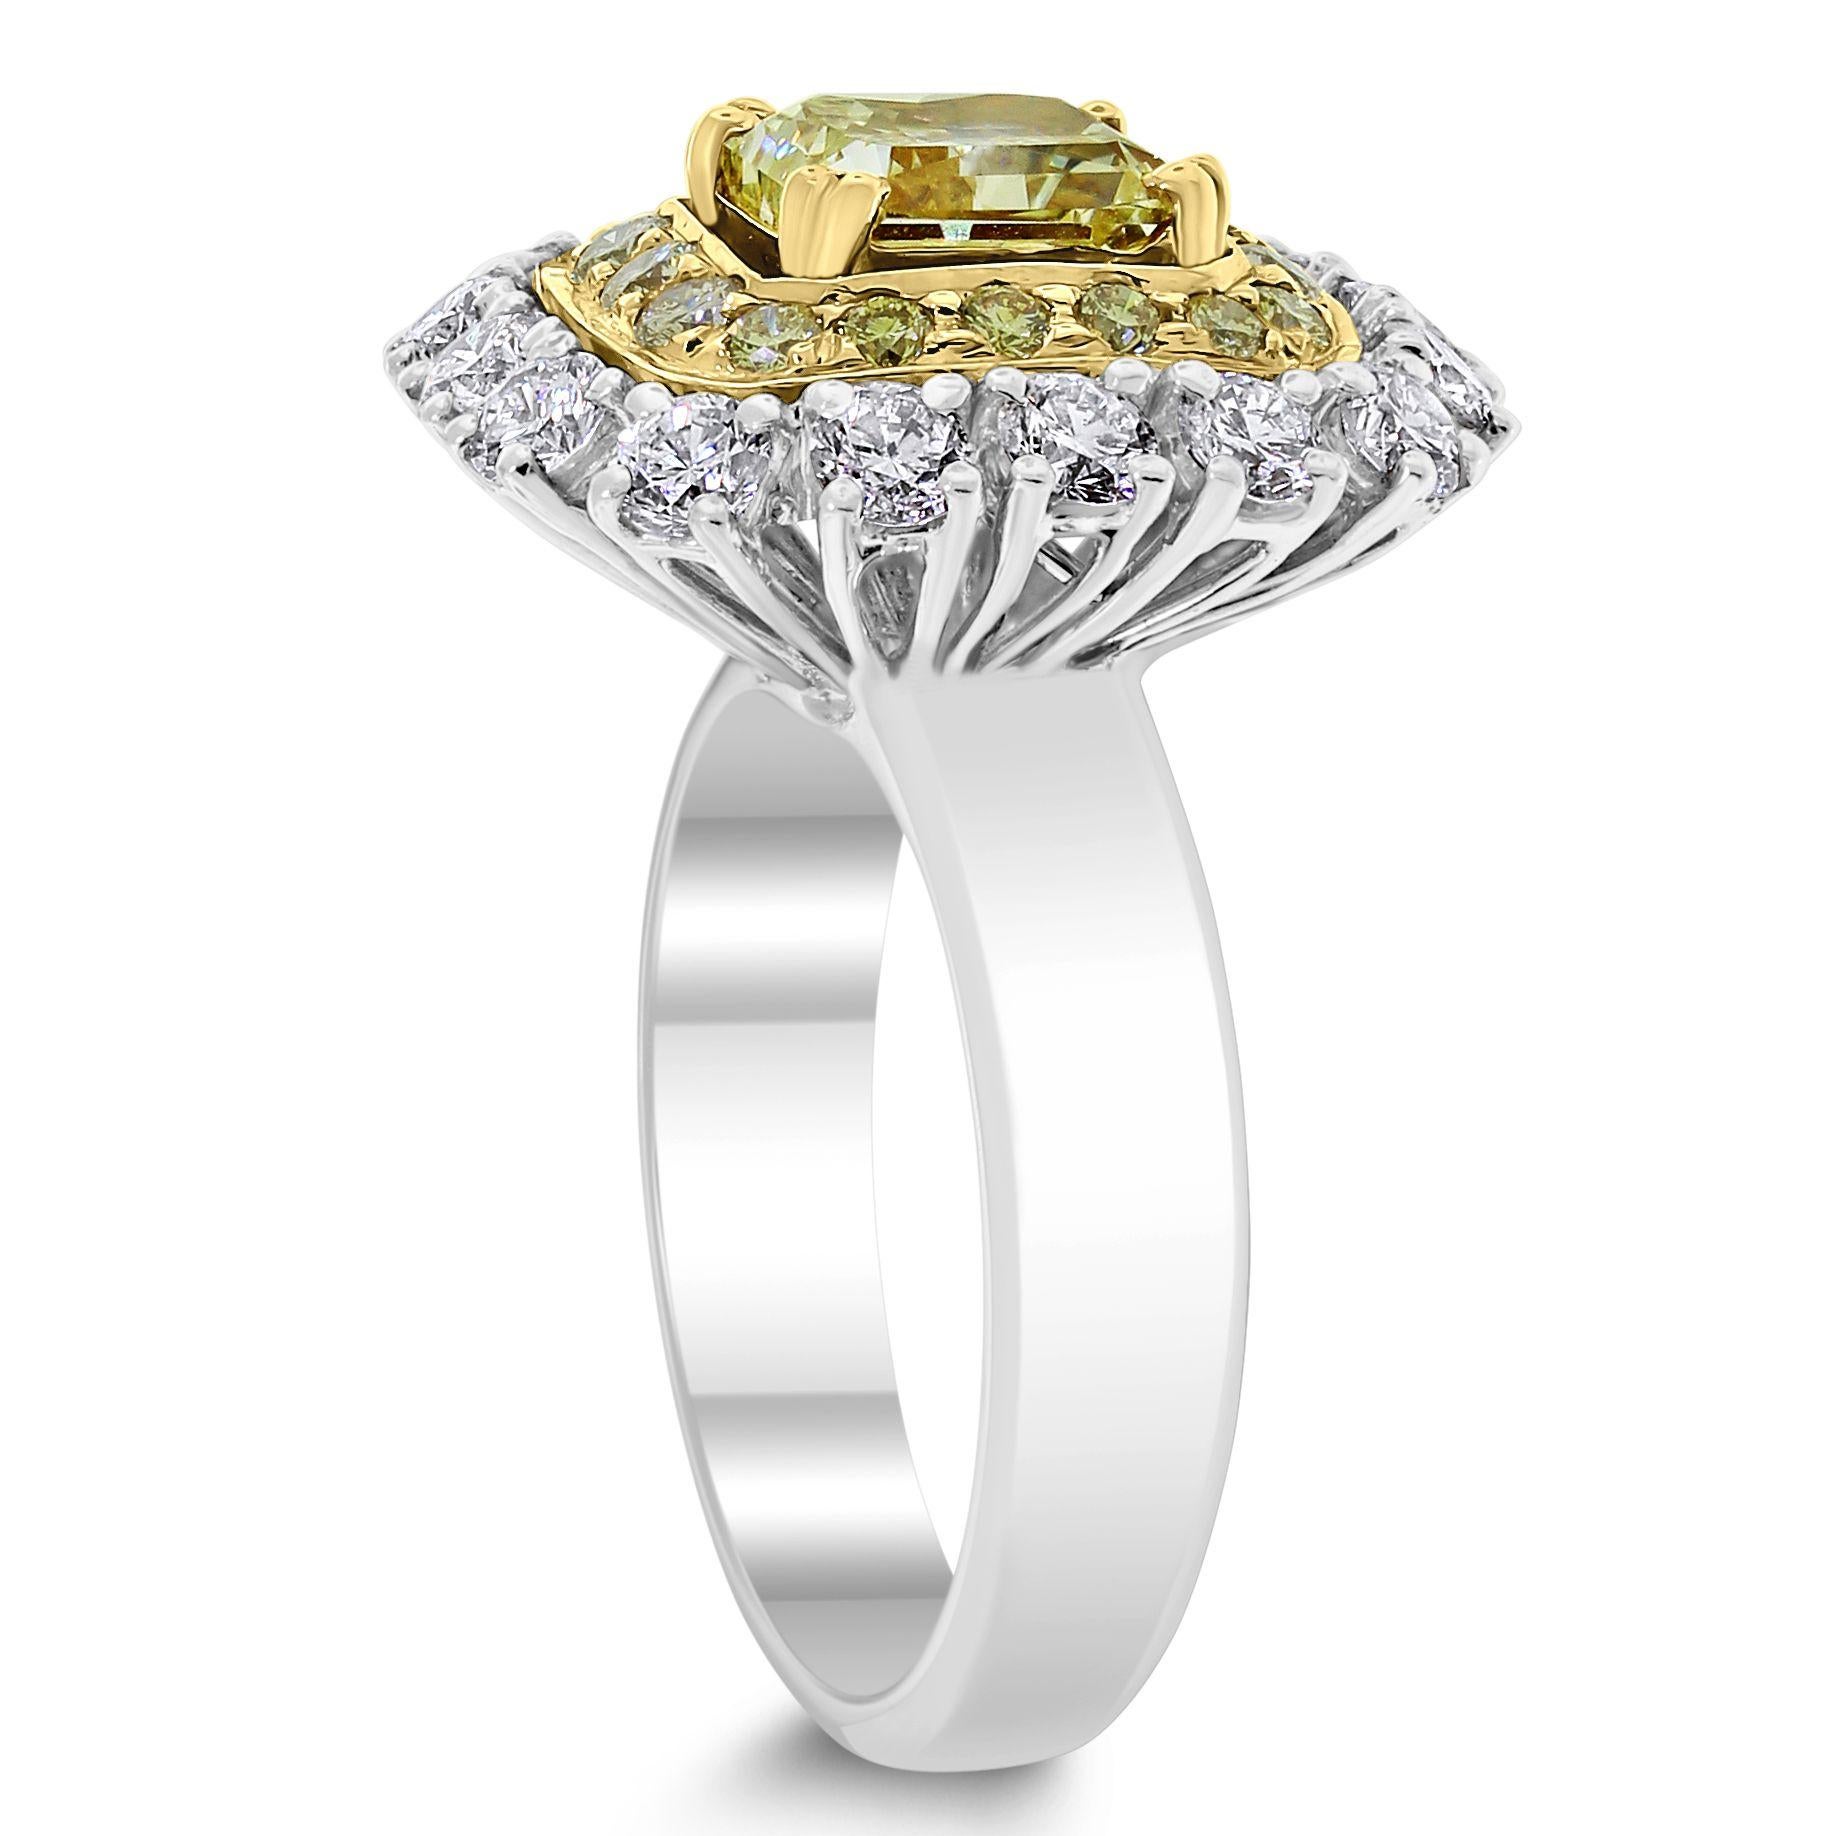 Colorful and pronounced, the Genevieve ring brings together sunshine and starlight with a combination of yellow and white diamonds. The center radiant dazzles while the concentric halos of yellow and white diamonds highlight its beauty and